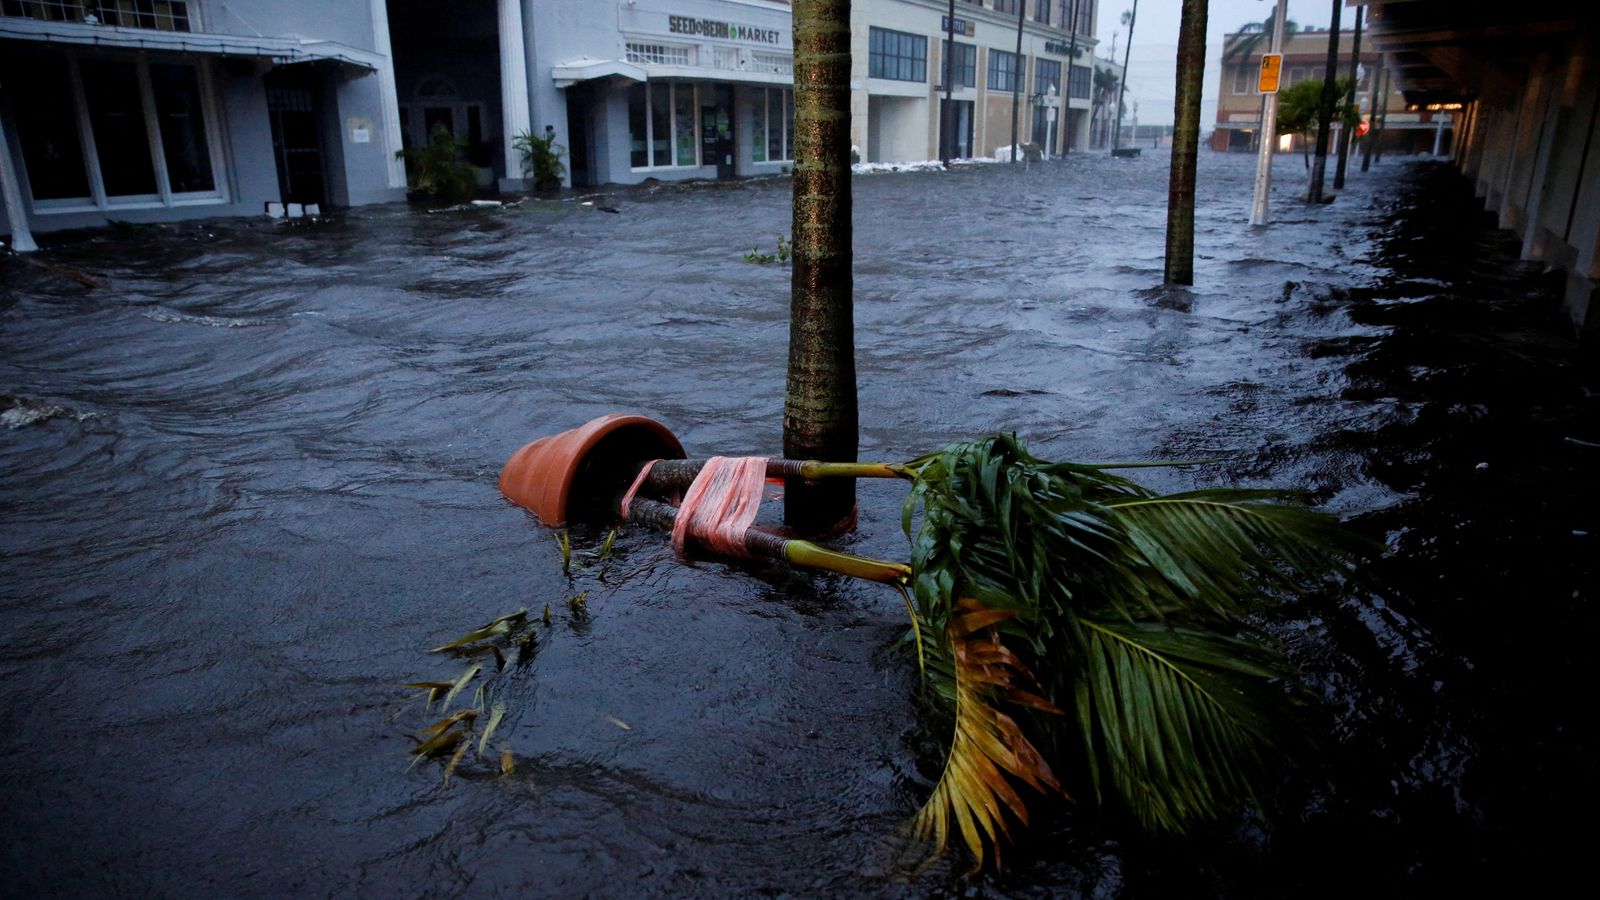 Millions more braced as Hurricane Ian regains strength and barrels north - leaving a devastated Florida behind